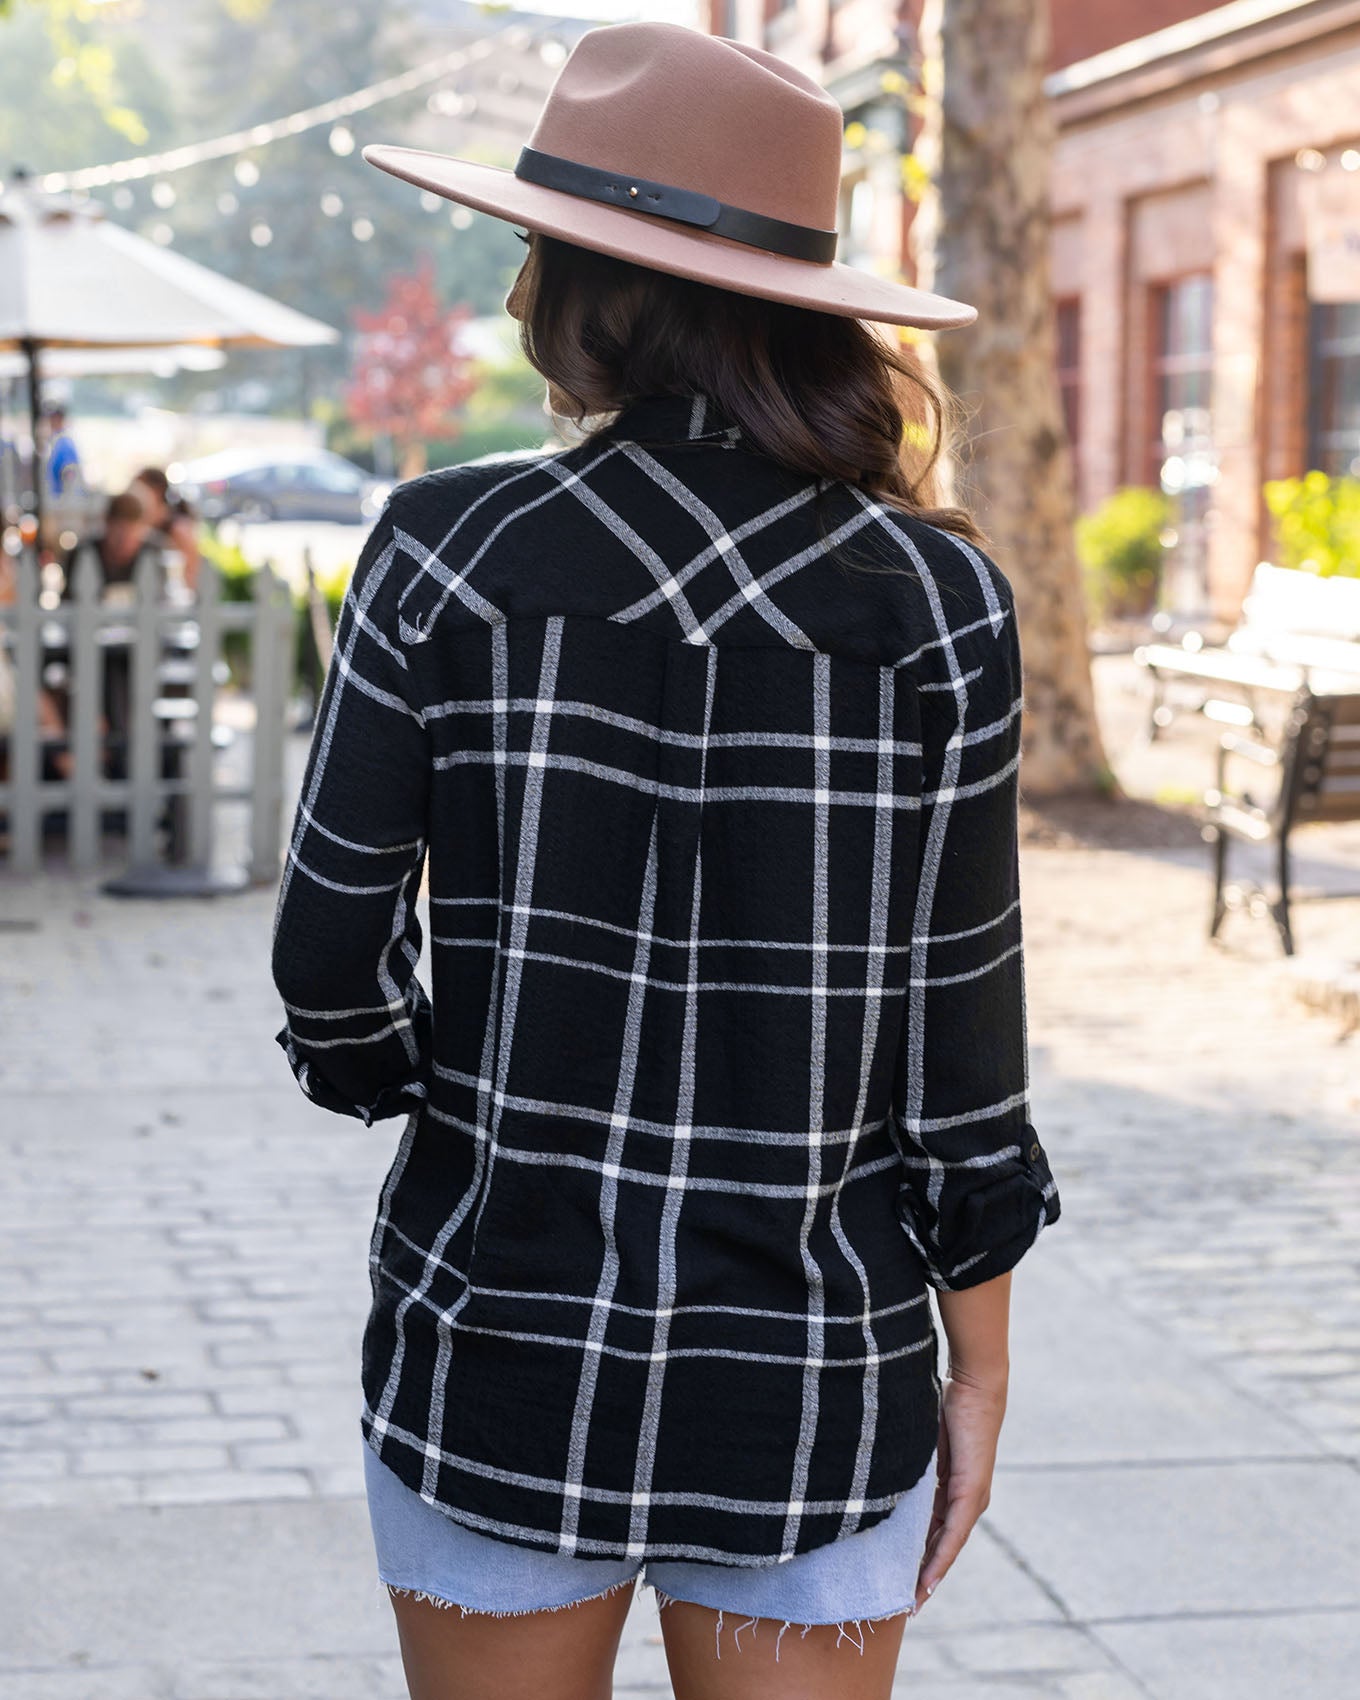 back view of favorite button up top in black plaid